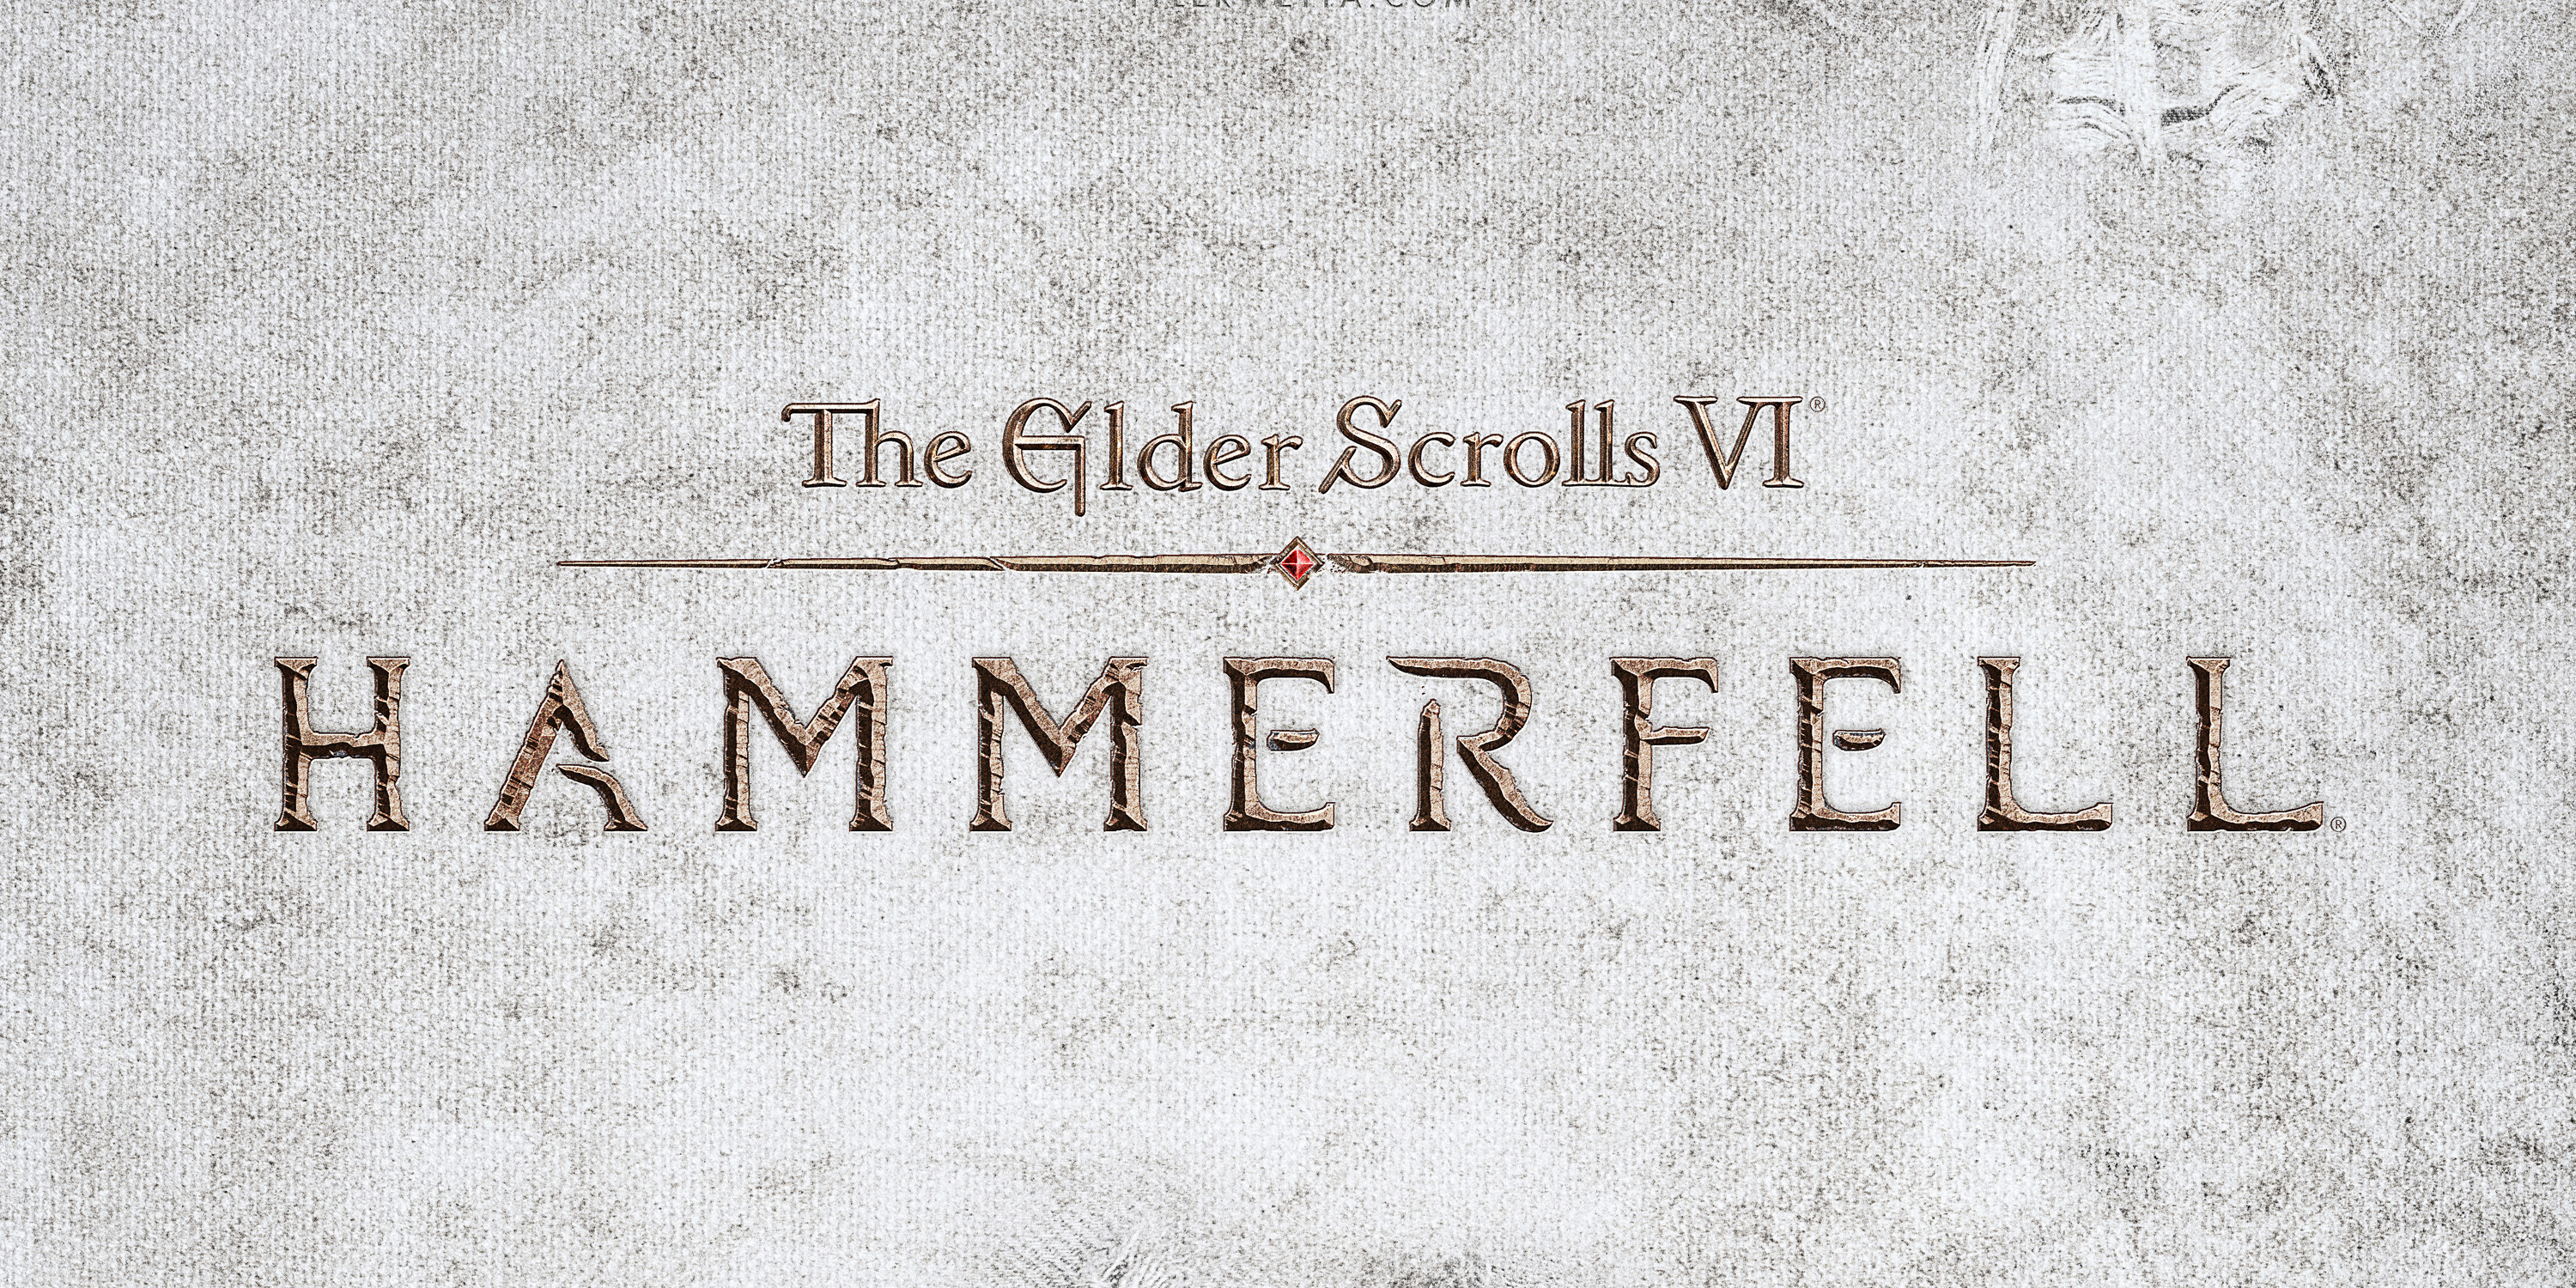 It's 100% in Hammerfell. If someone tells you the trailer is in